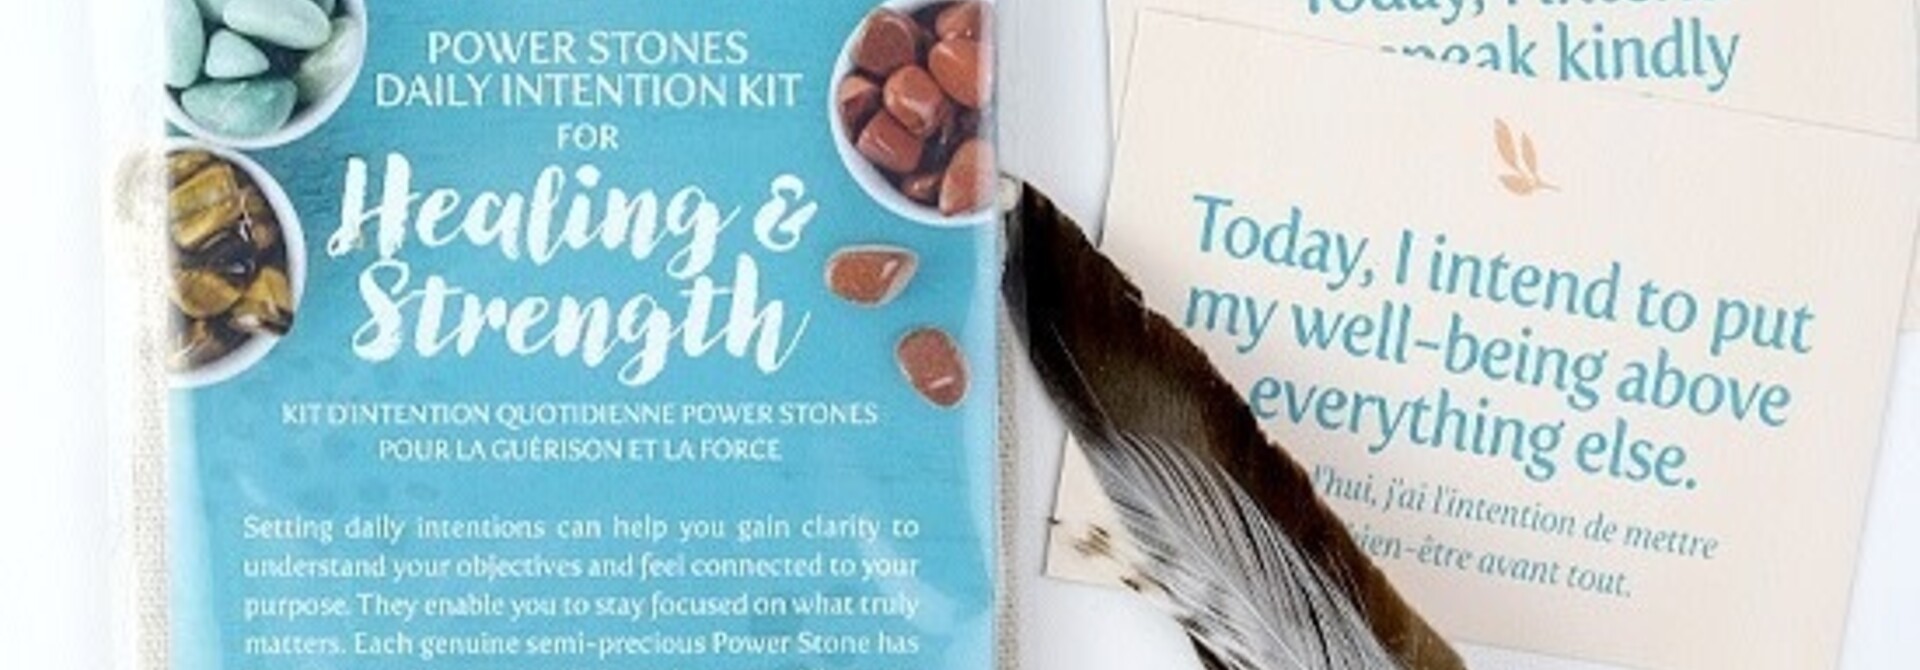 Power Stone Intention Kit Healing and Strength